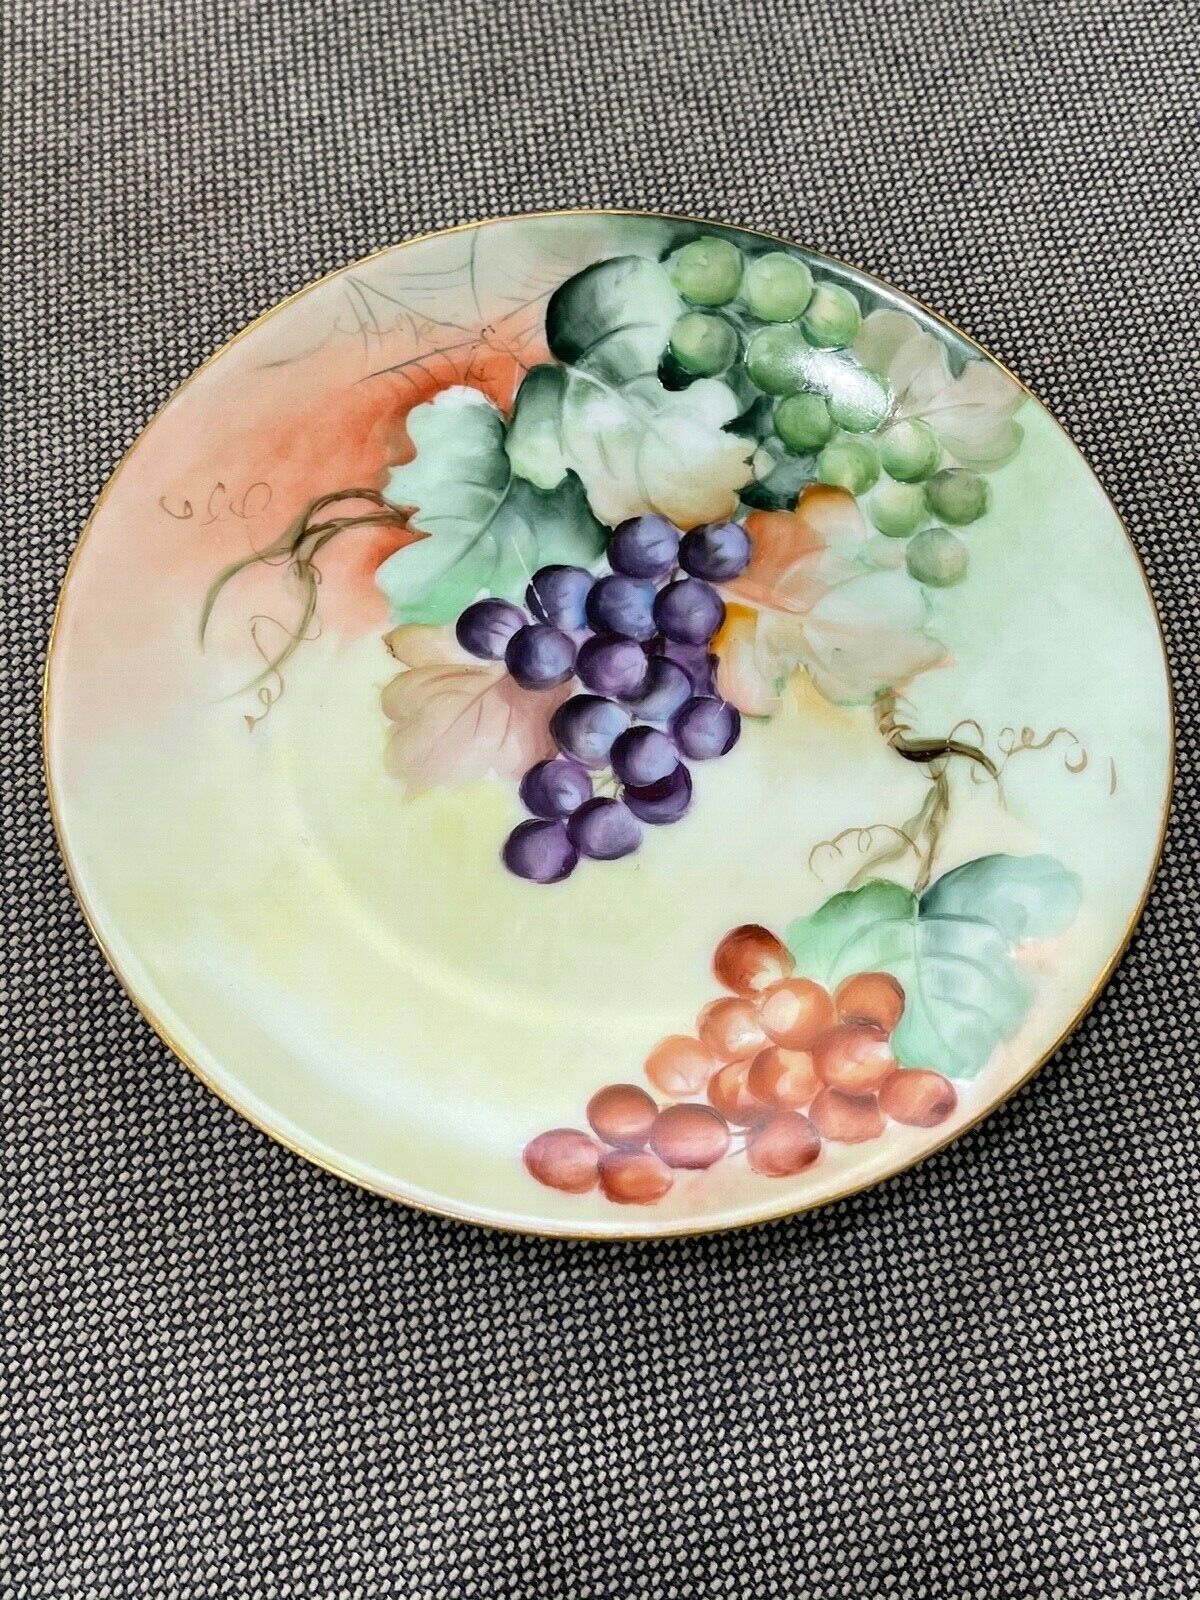 Antique Fritz Thomas Porcelain Plate with Red Purple & Green Grapes Decoration